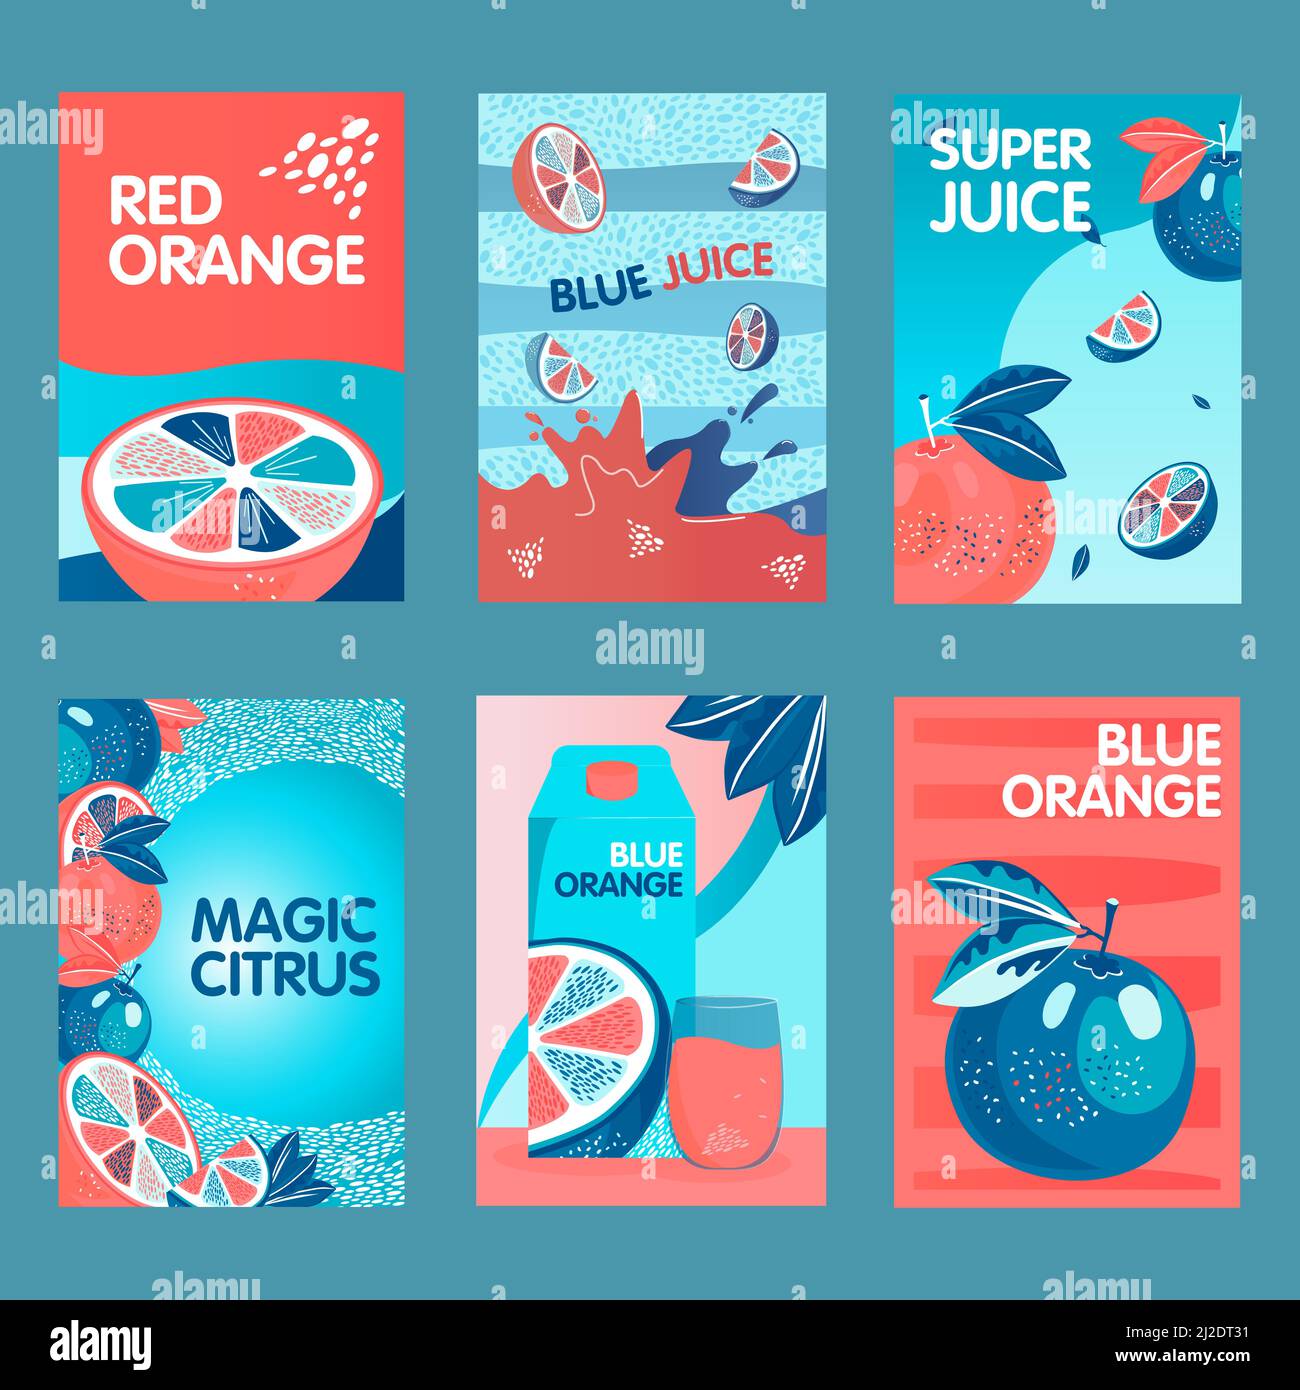 Red and blue orange posters set. Whole and cut fruits, splashes, citrus juice pack vector illustrations with text. Food and drink concept for packs or Stock Vector